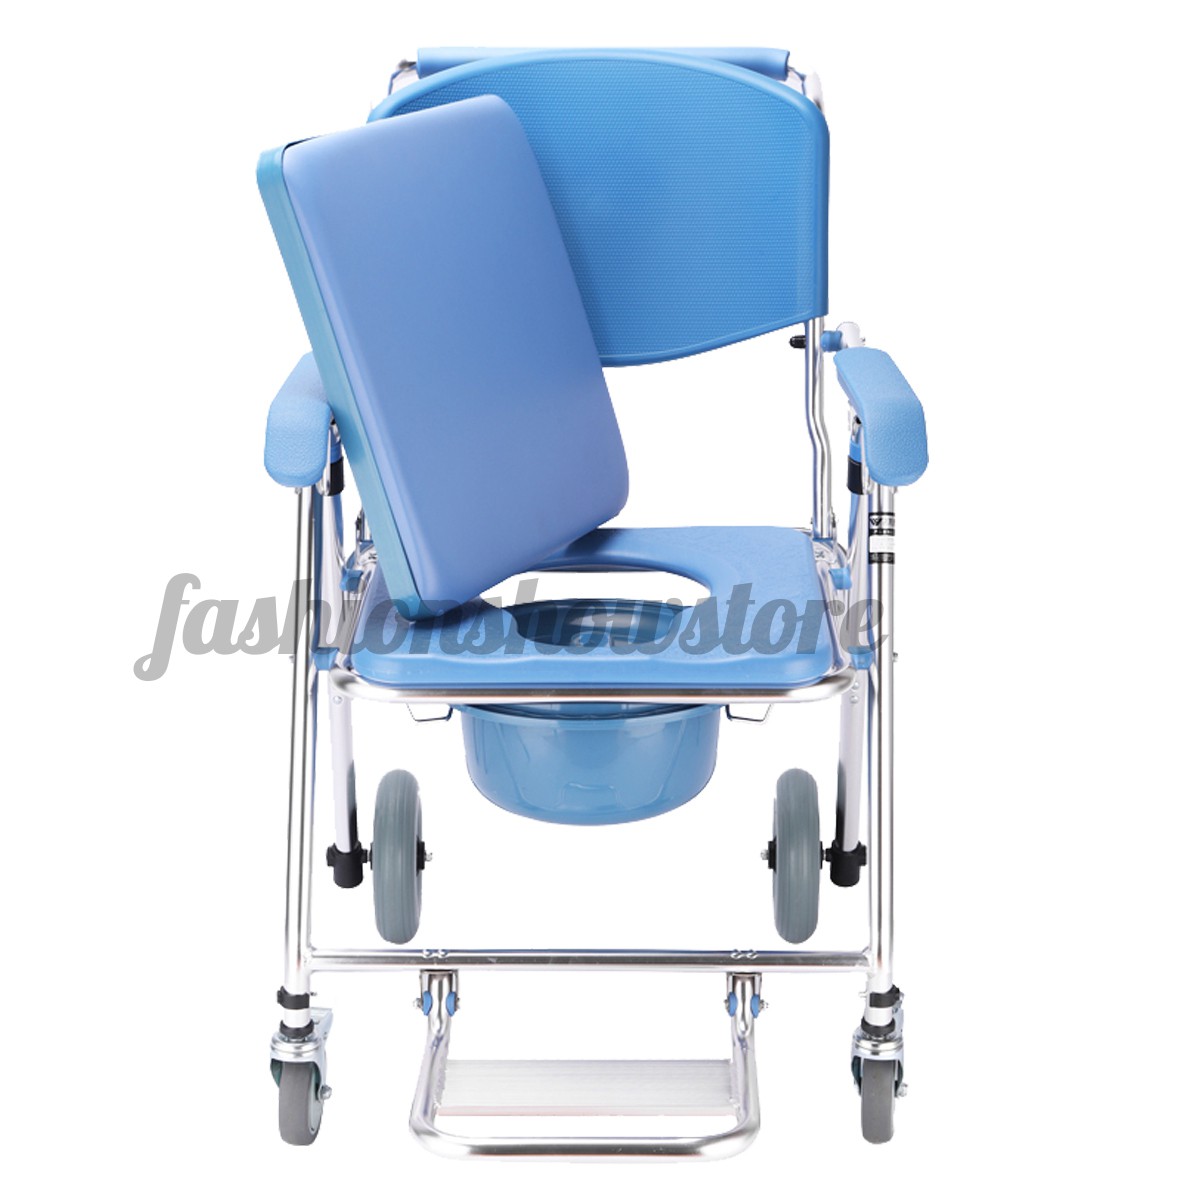 fold up chair with wheels